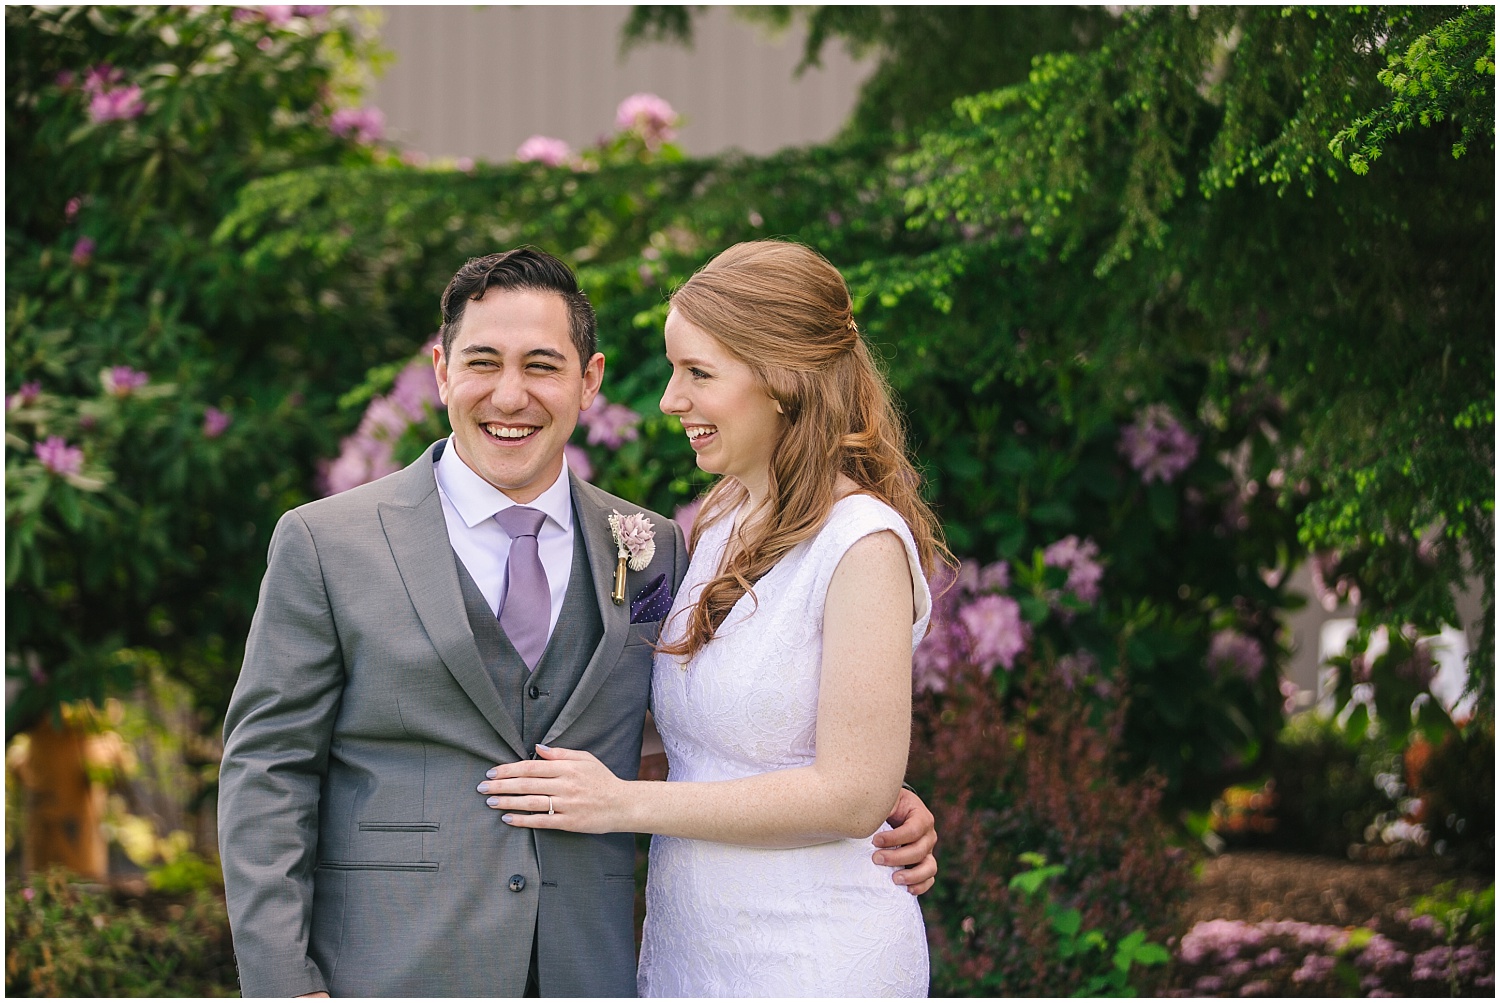 Bride and groom portraits at Lord Hill Farms wedding in Snohomish Washington